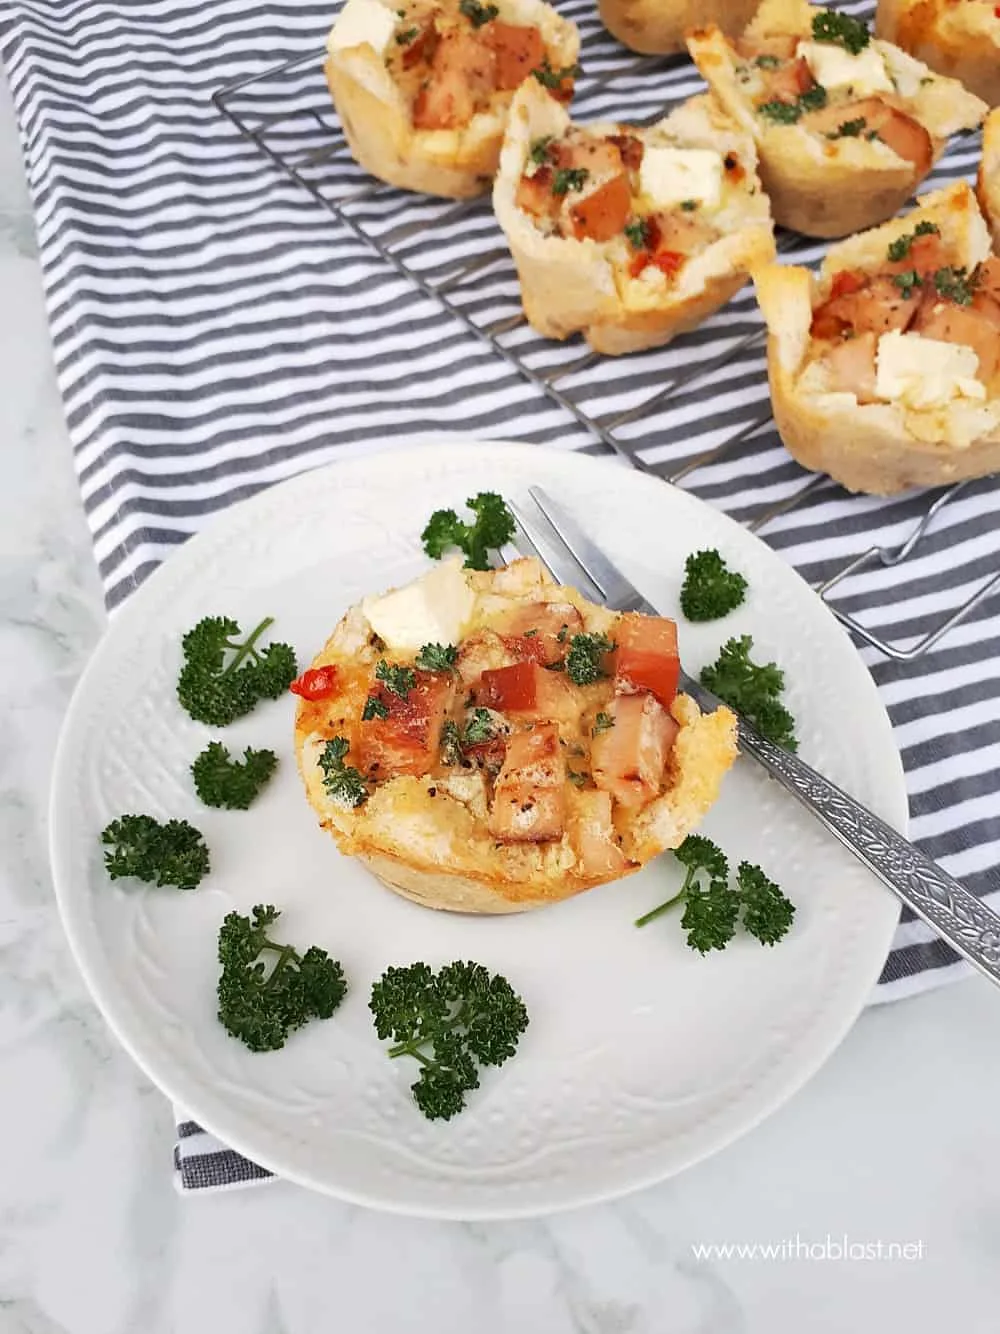 A very versatile recipe for Chicken and Creamy Garlic Bread Baskets - serve as a light dinner, snack or as an appetizer. Perfect to use up leftover Chicken and Bread.